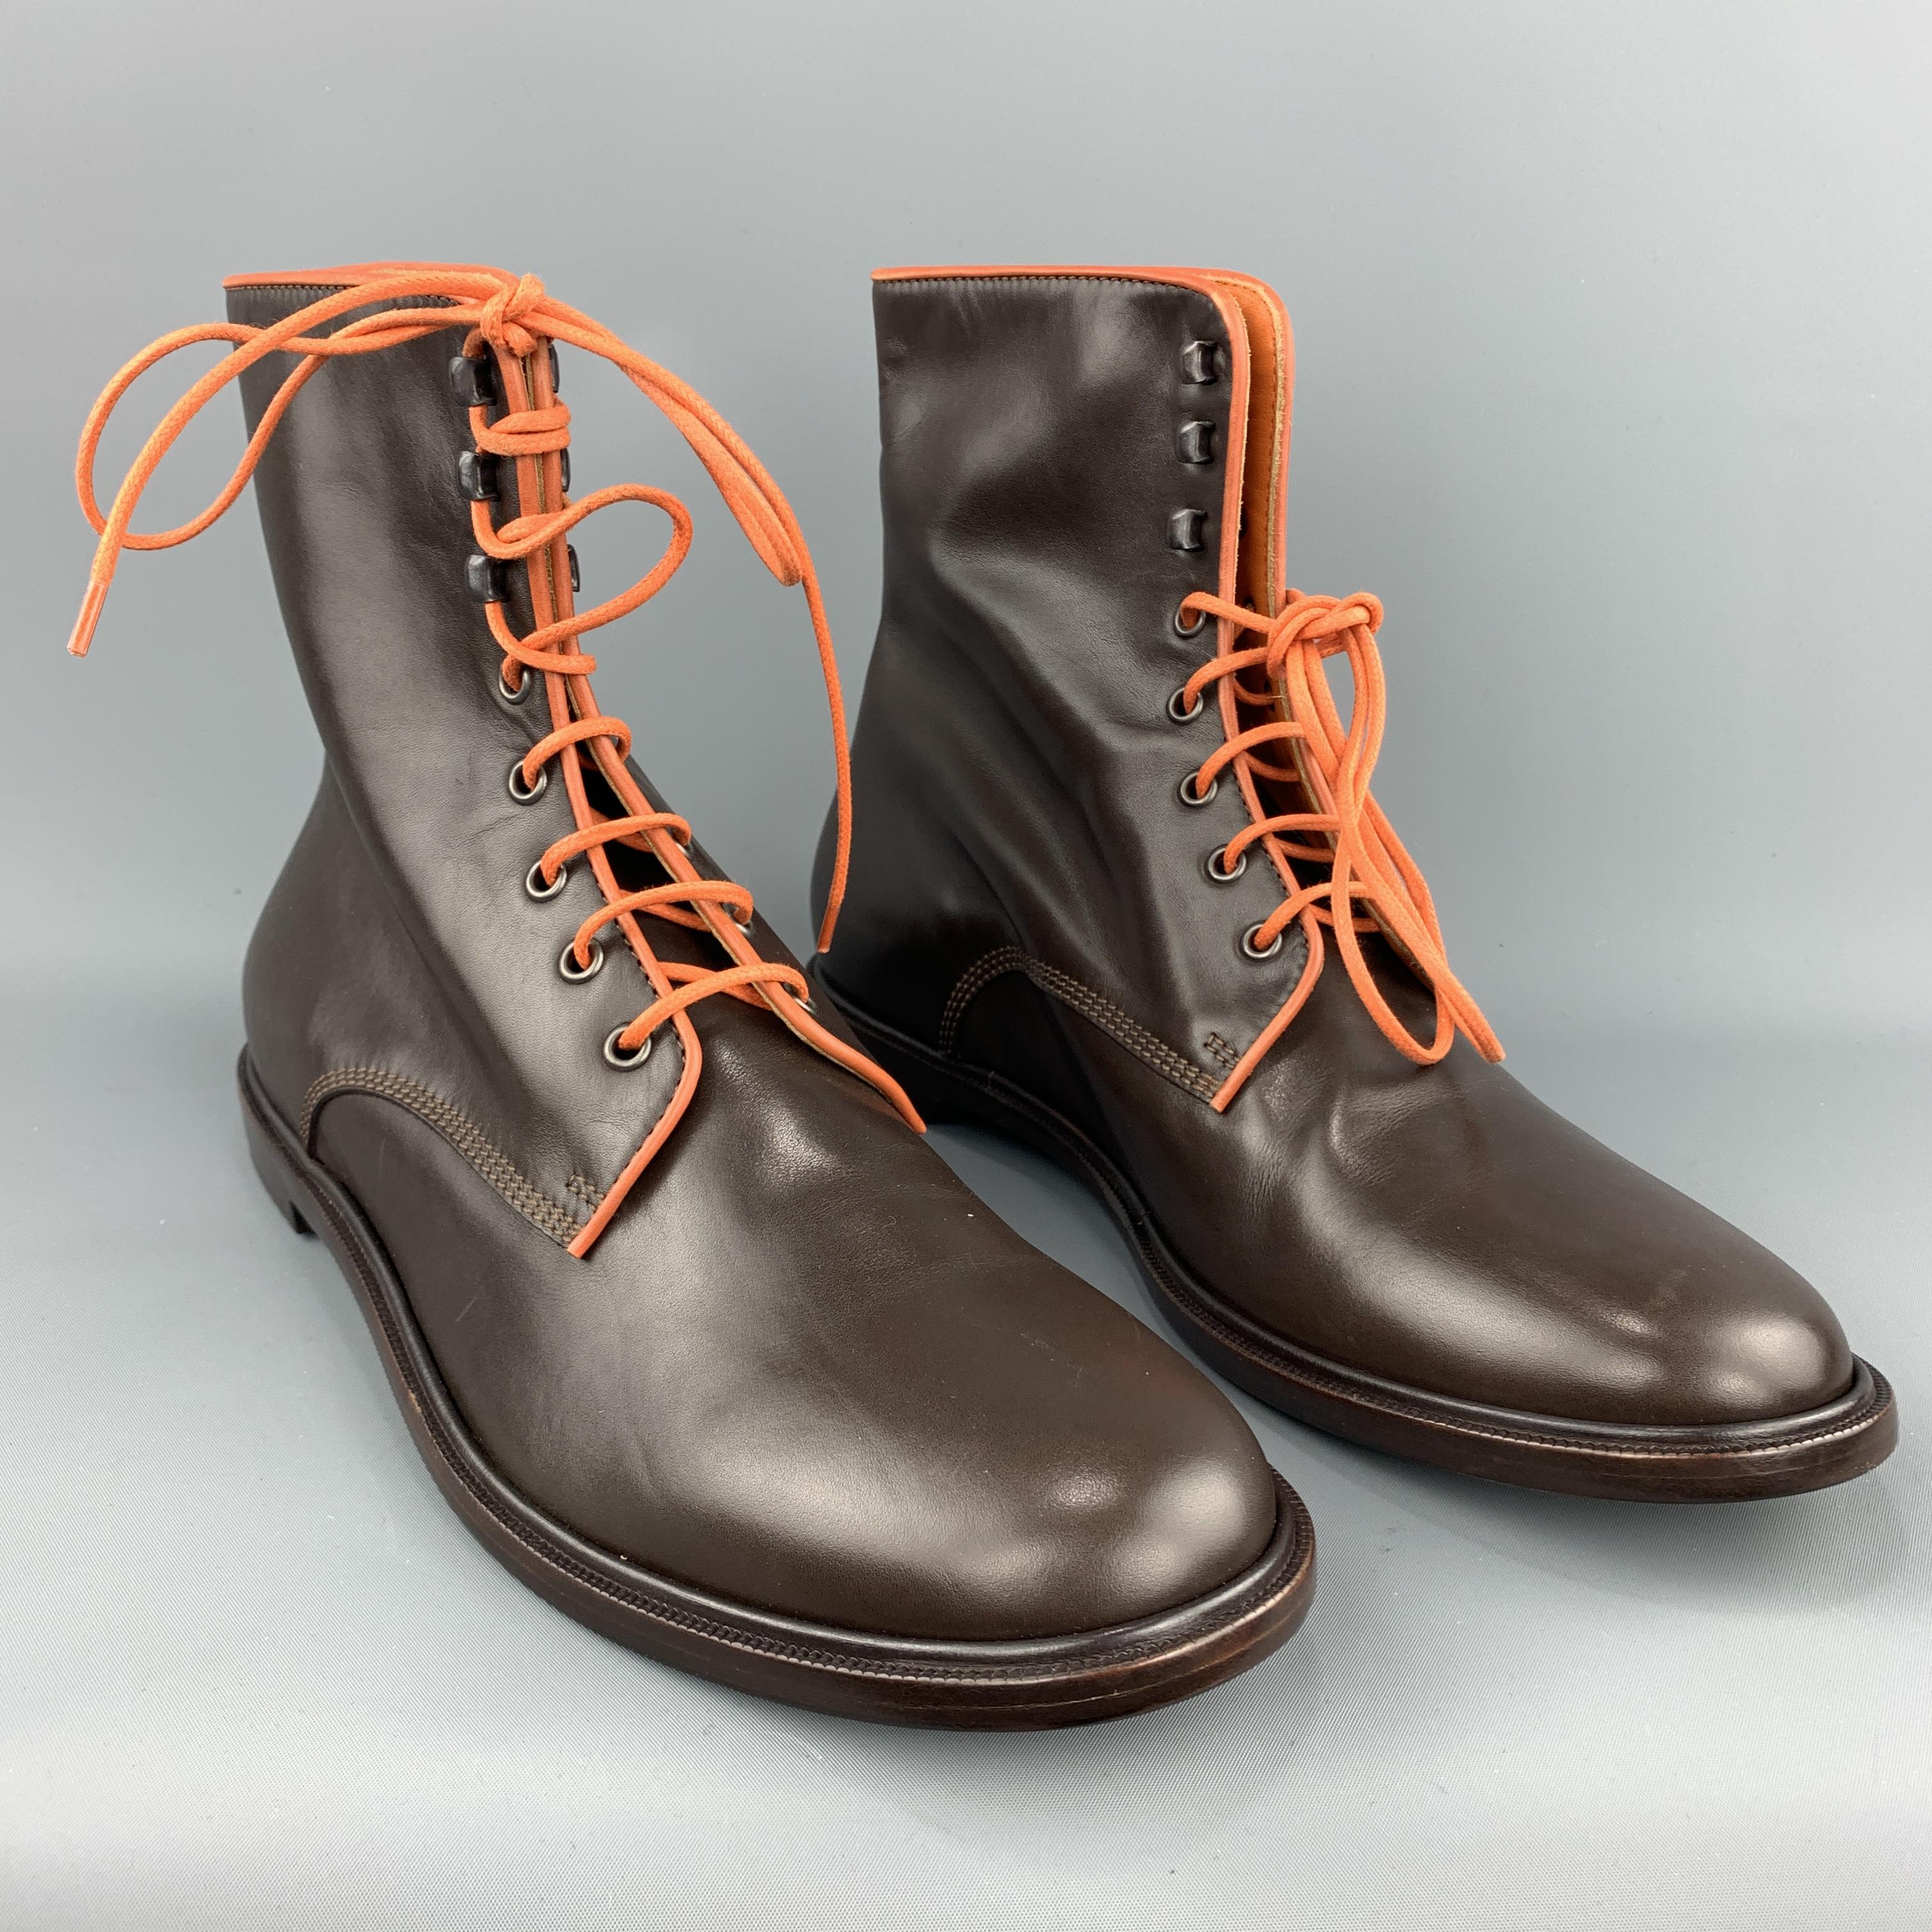 ETRO boots come in smooth brown leather with orange piping and laces. New with Box. Made in Italy.
 
Brand New.
Marked: IT 45
 
Outsole: 12.75 x 4.5 in.
Height: 7.5 in.